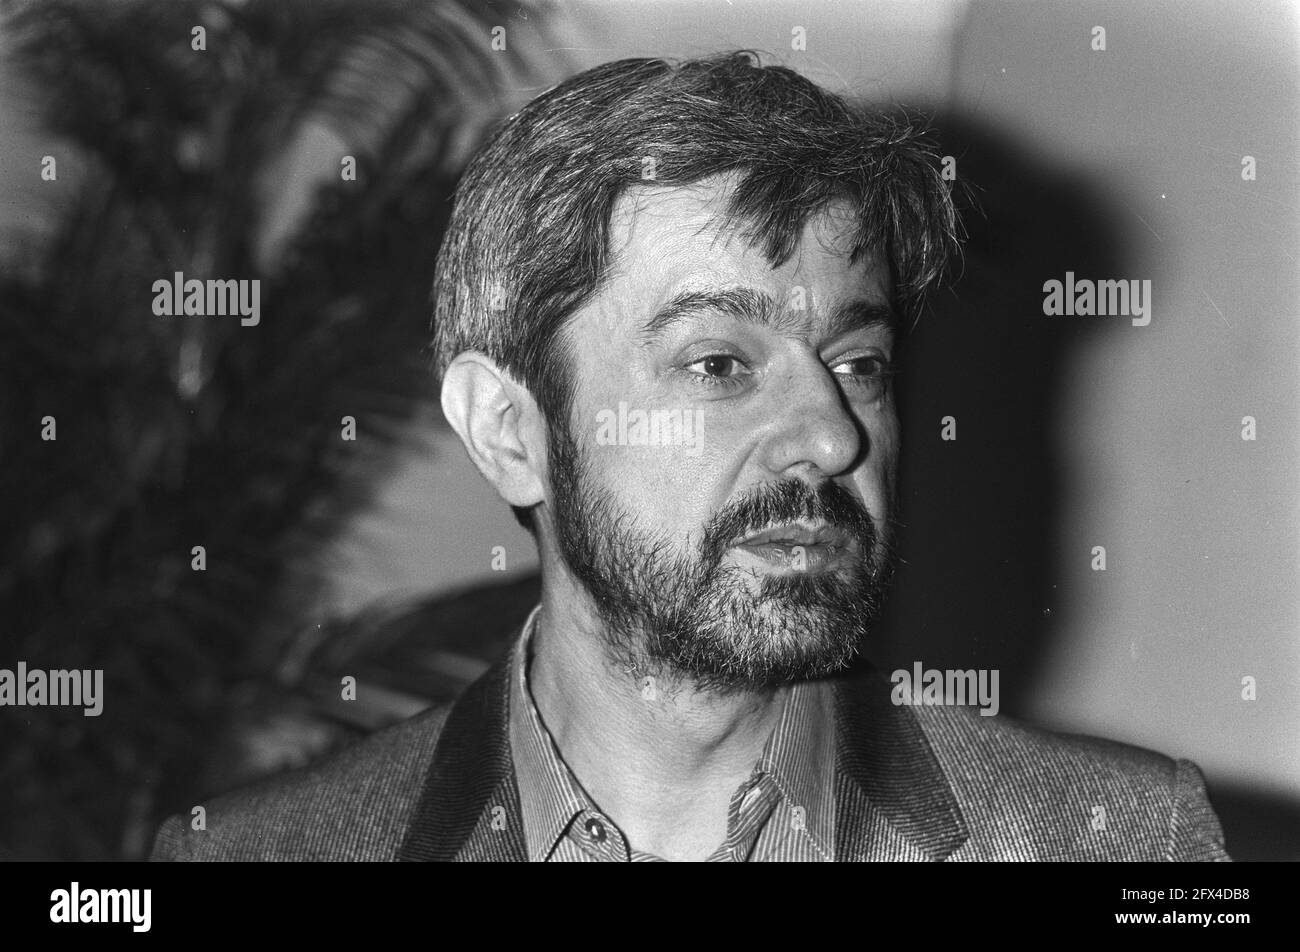 The German writer Jurek Becker, expelled from the party in 1976 in the GDR because of his views on the Wolff Biermann case, stays for a lecture in Amsterdam, November 14, 1981, portraits, writers, The Netherlands, 20th century press agency photo, news to remember, documentary, historic photography 1945-1990, visual stories, human history of the Twentieth Century, capturing moments in time Stock Photo